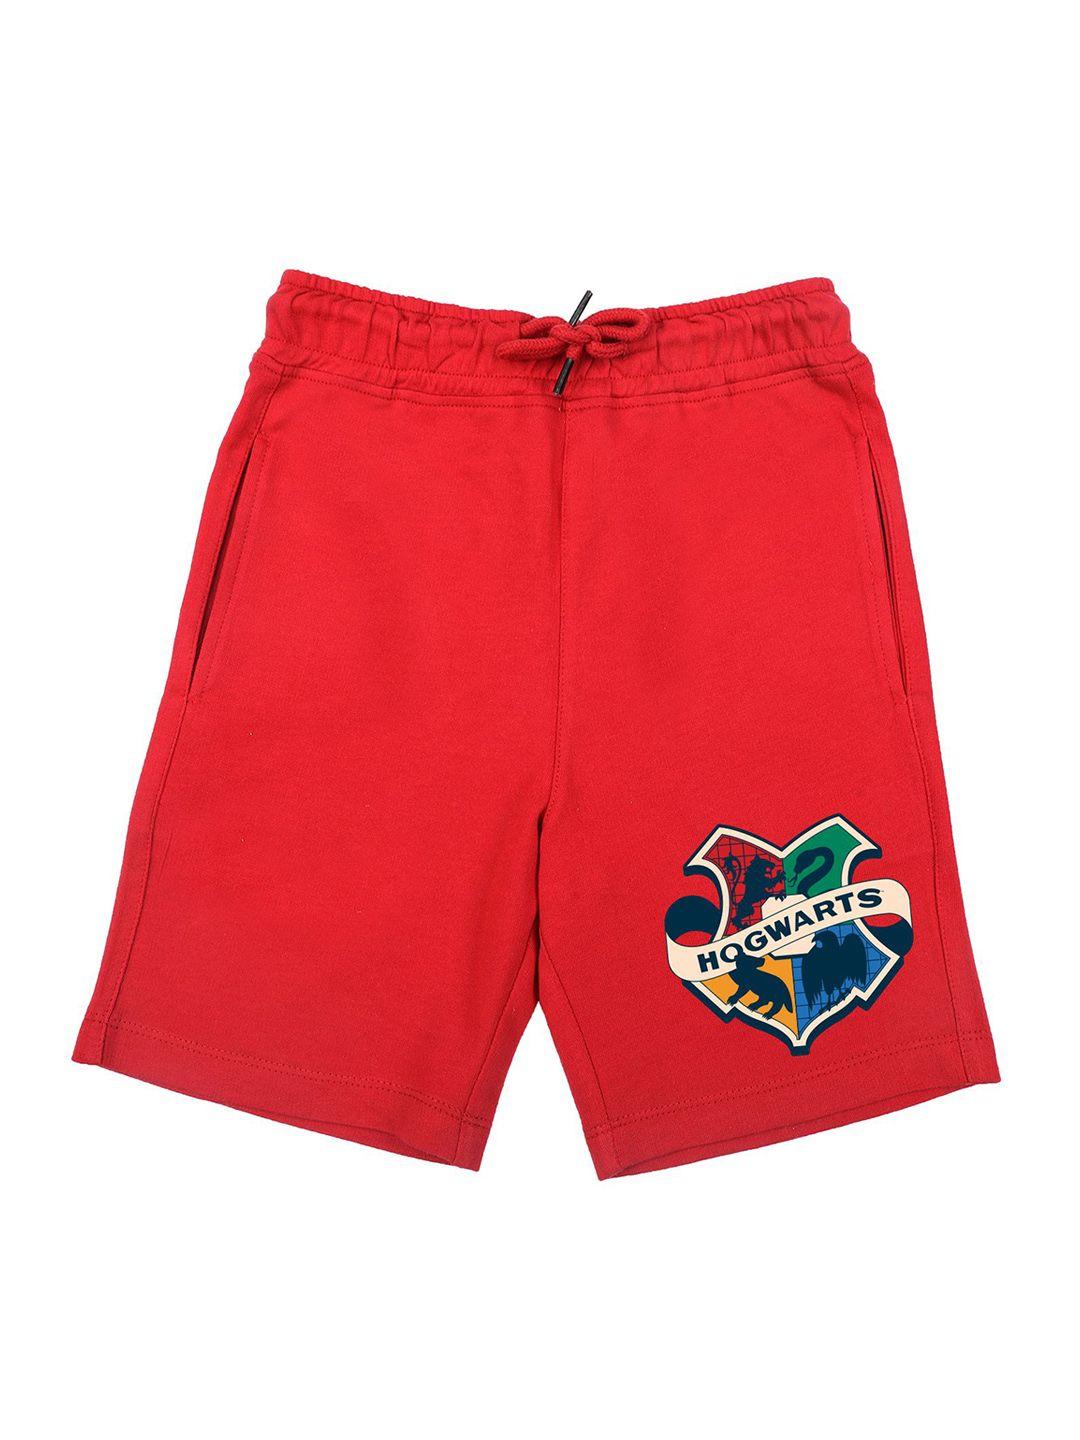 harry-potter-by-wear-your-mind-boys-red-printed-harry-potter-shorts